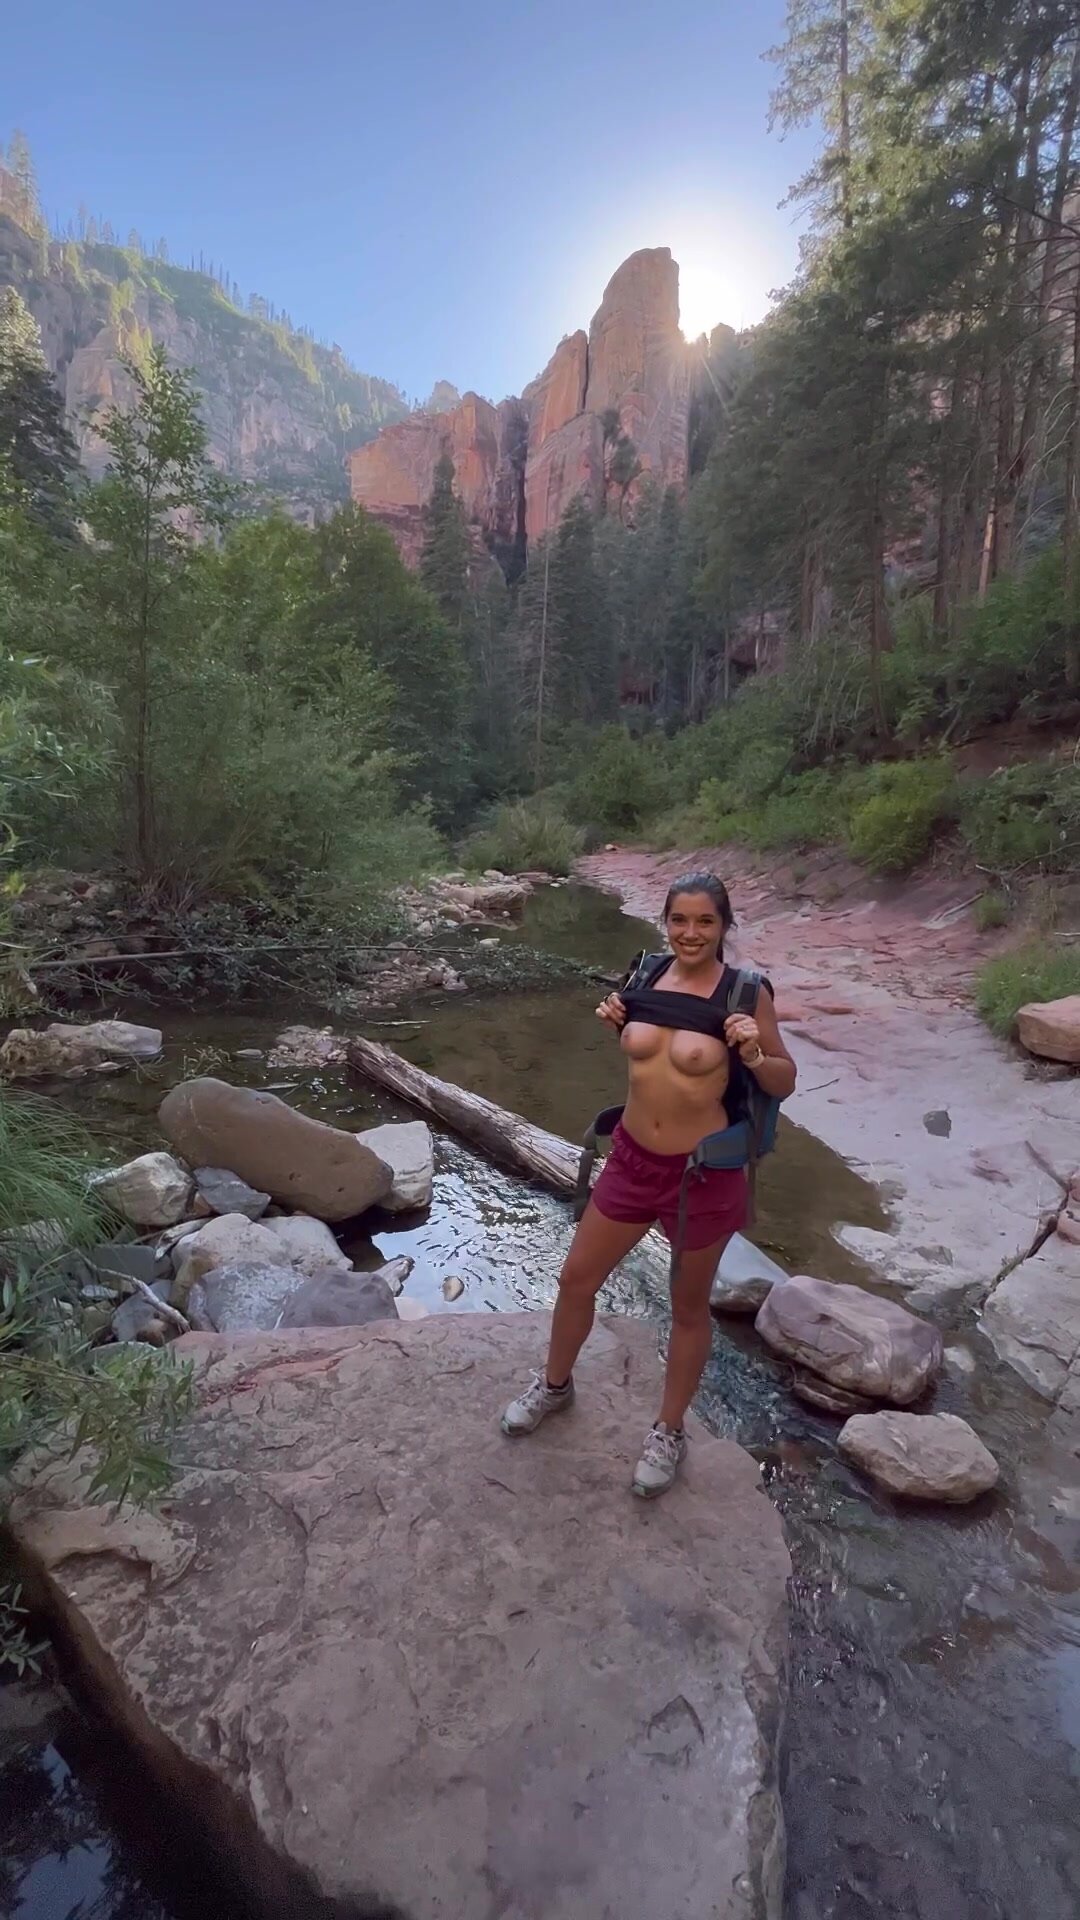 Came across this beautiful spot on my hike so of course I had to pull my tits out